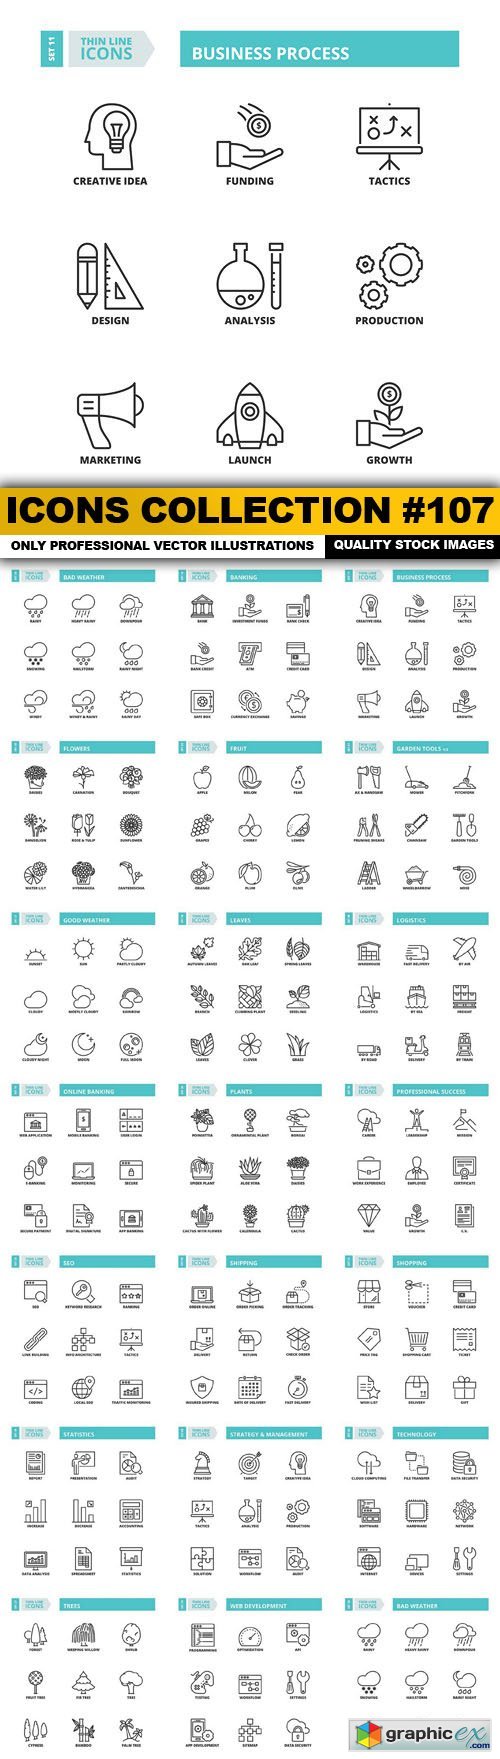 Icons Collection #107 - 20 Vector